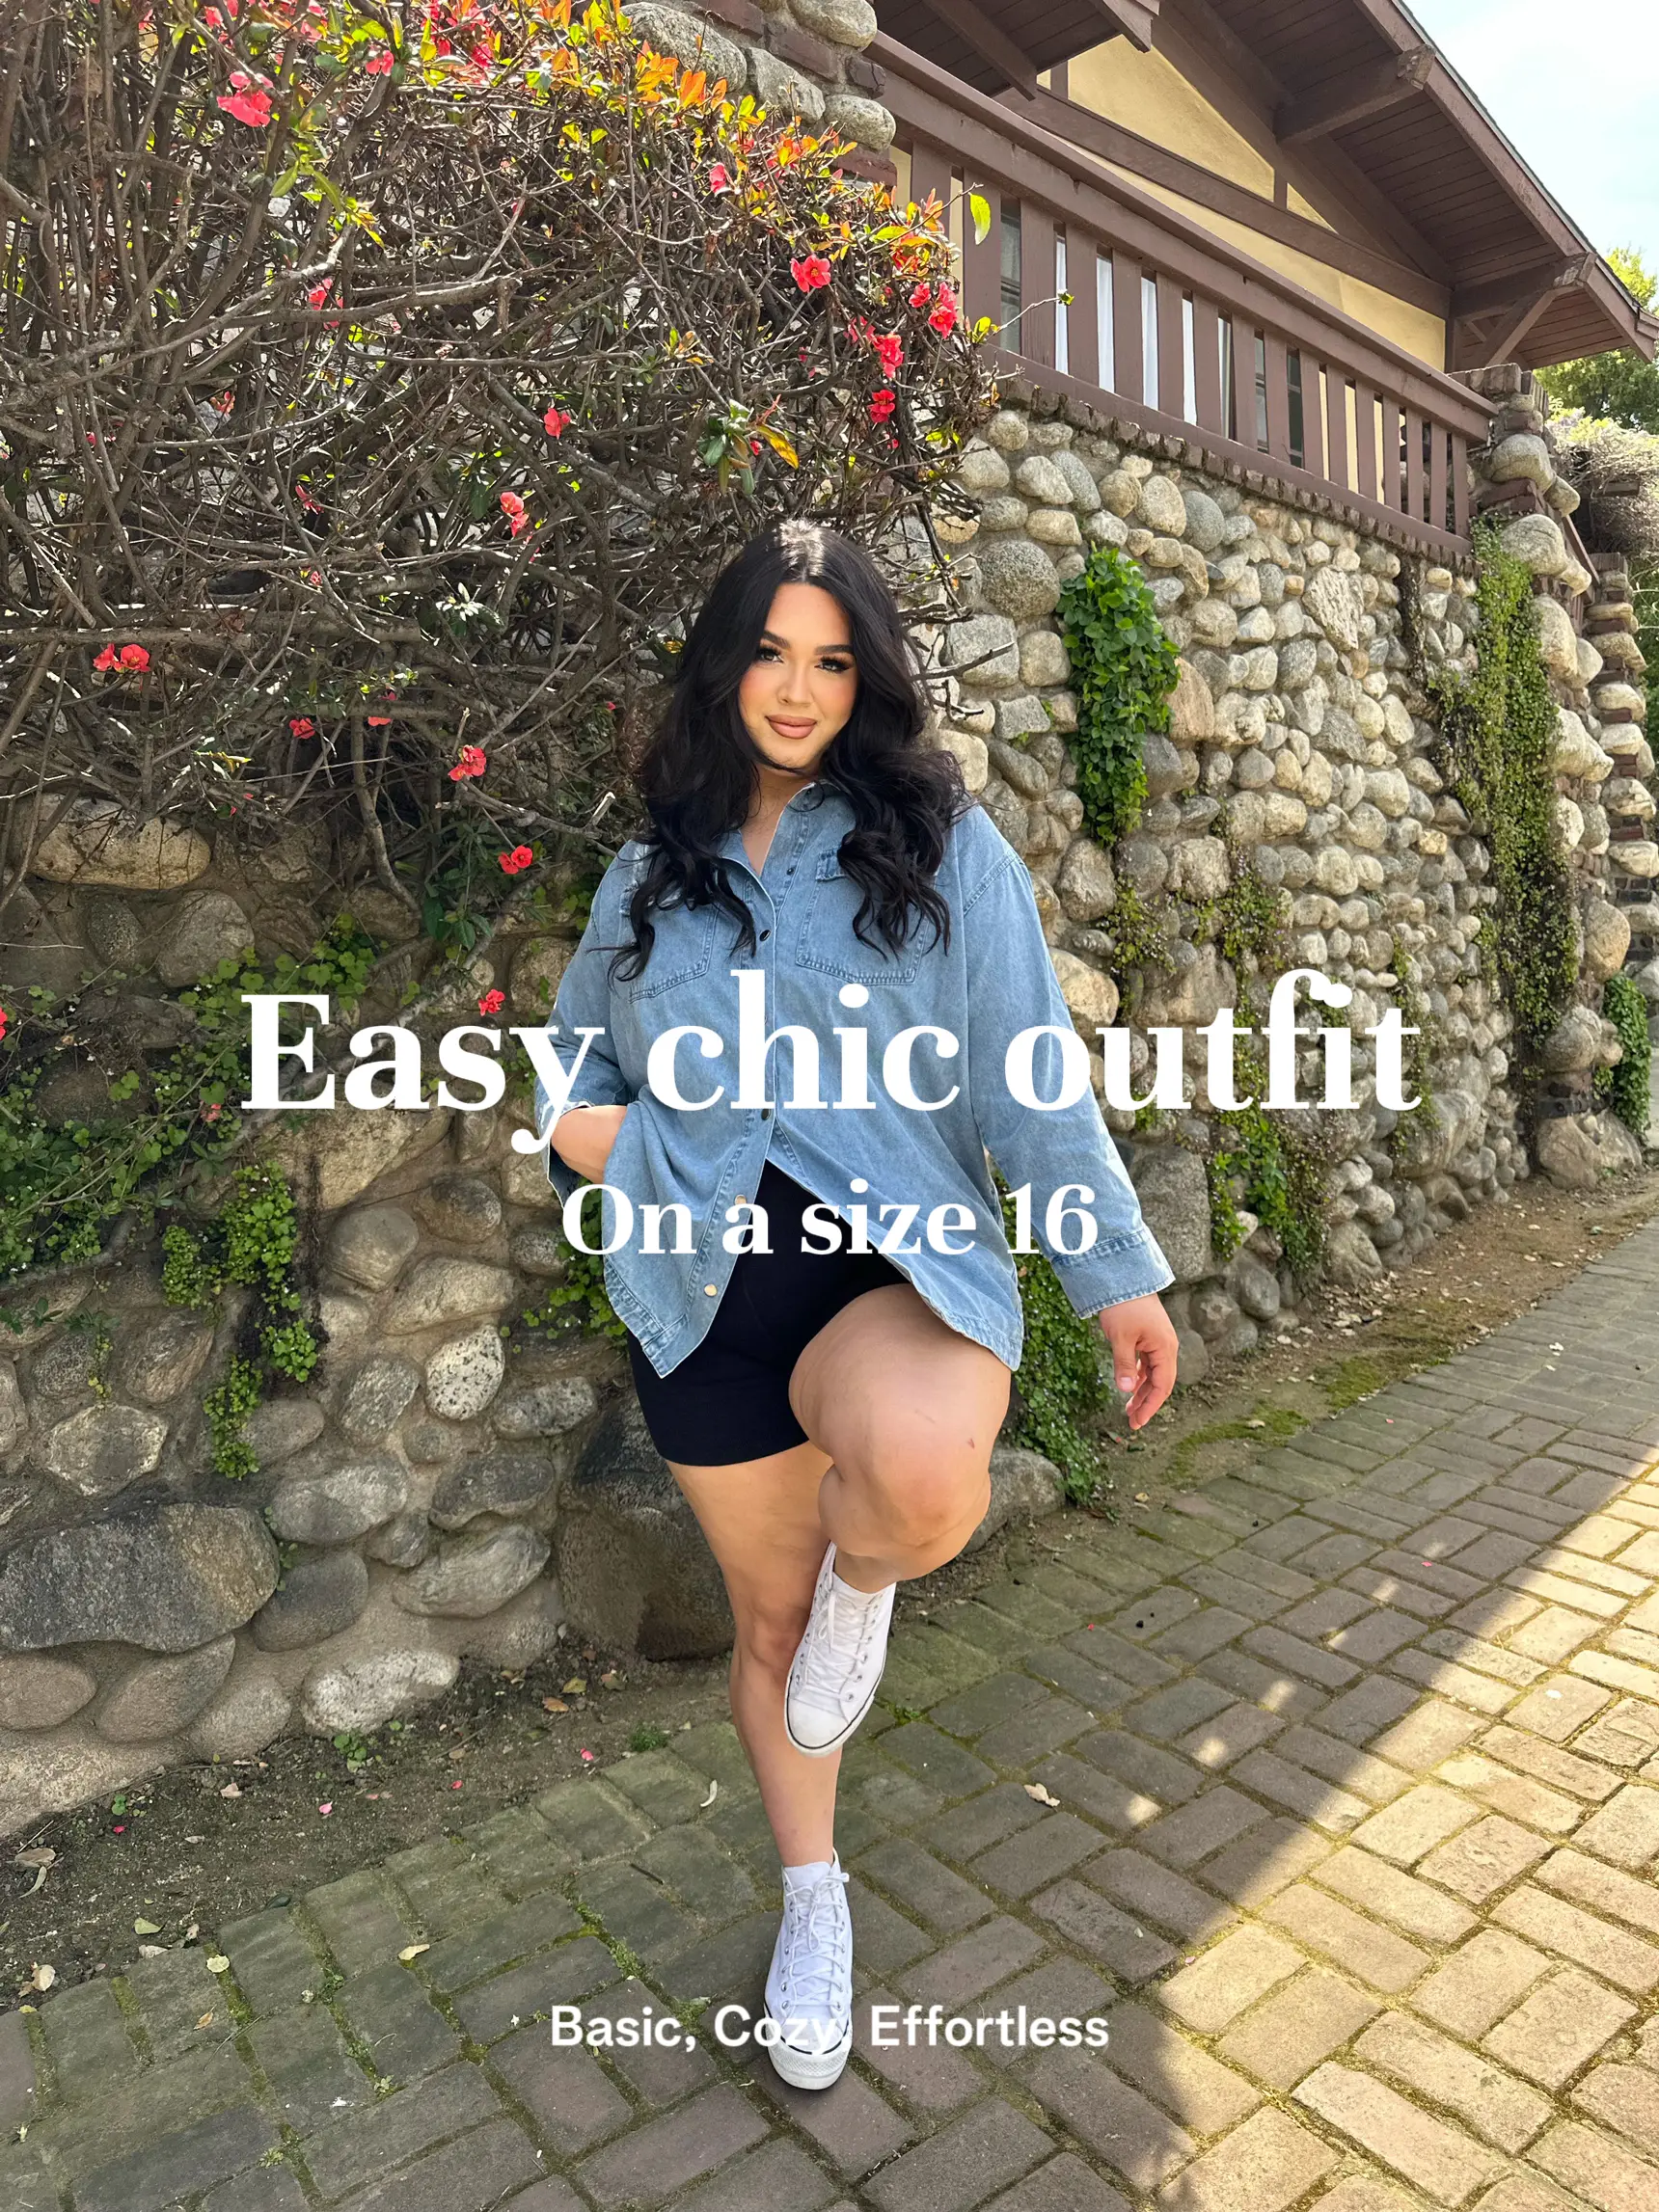 curvy outfit idea, Video published by Okitsmeena